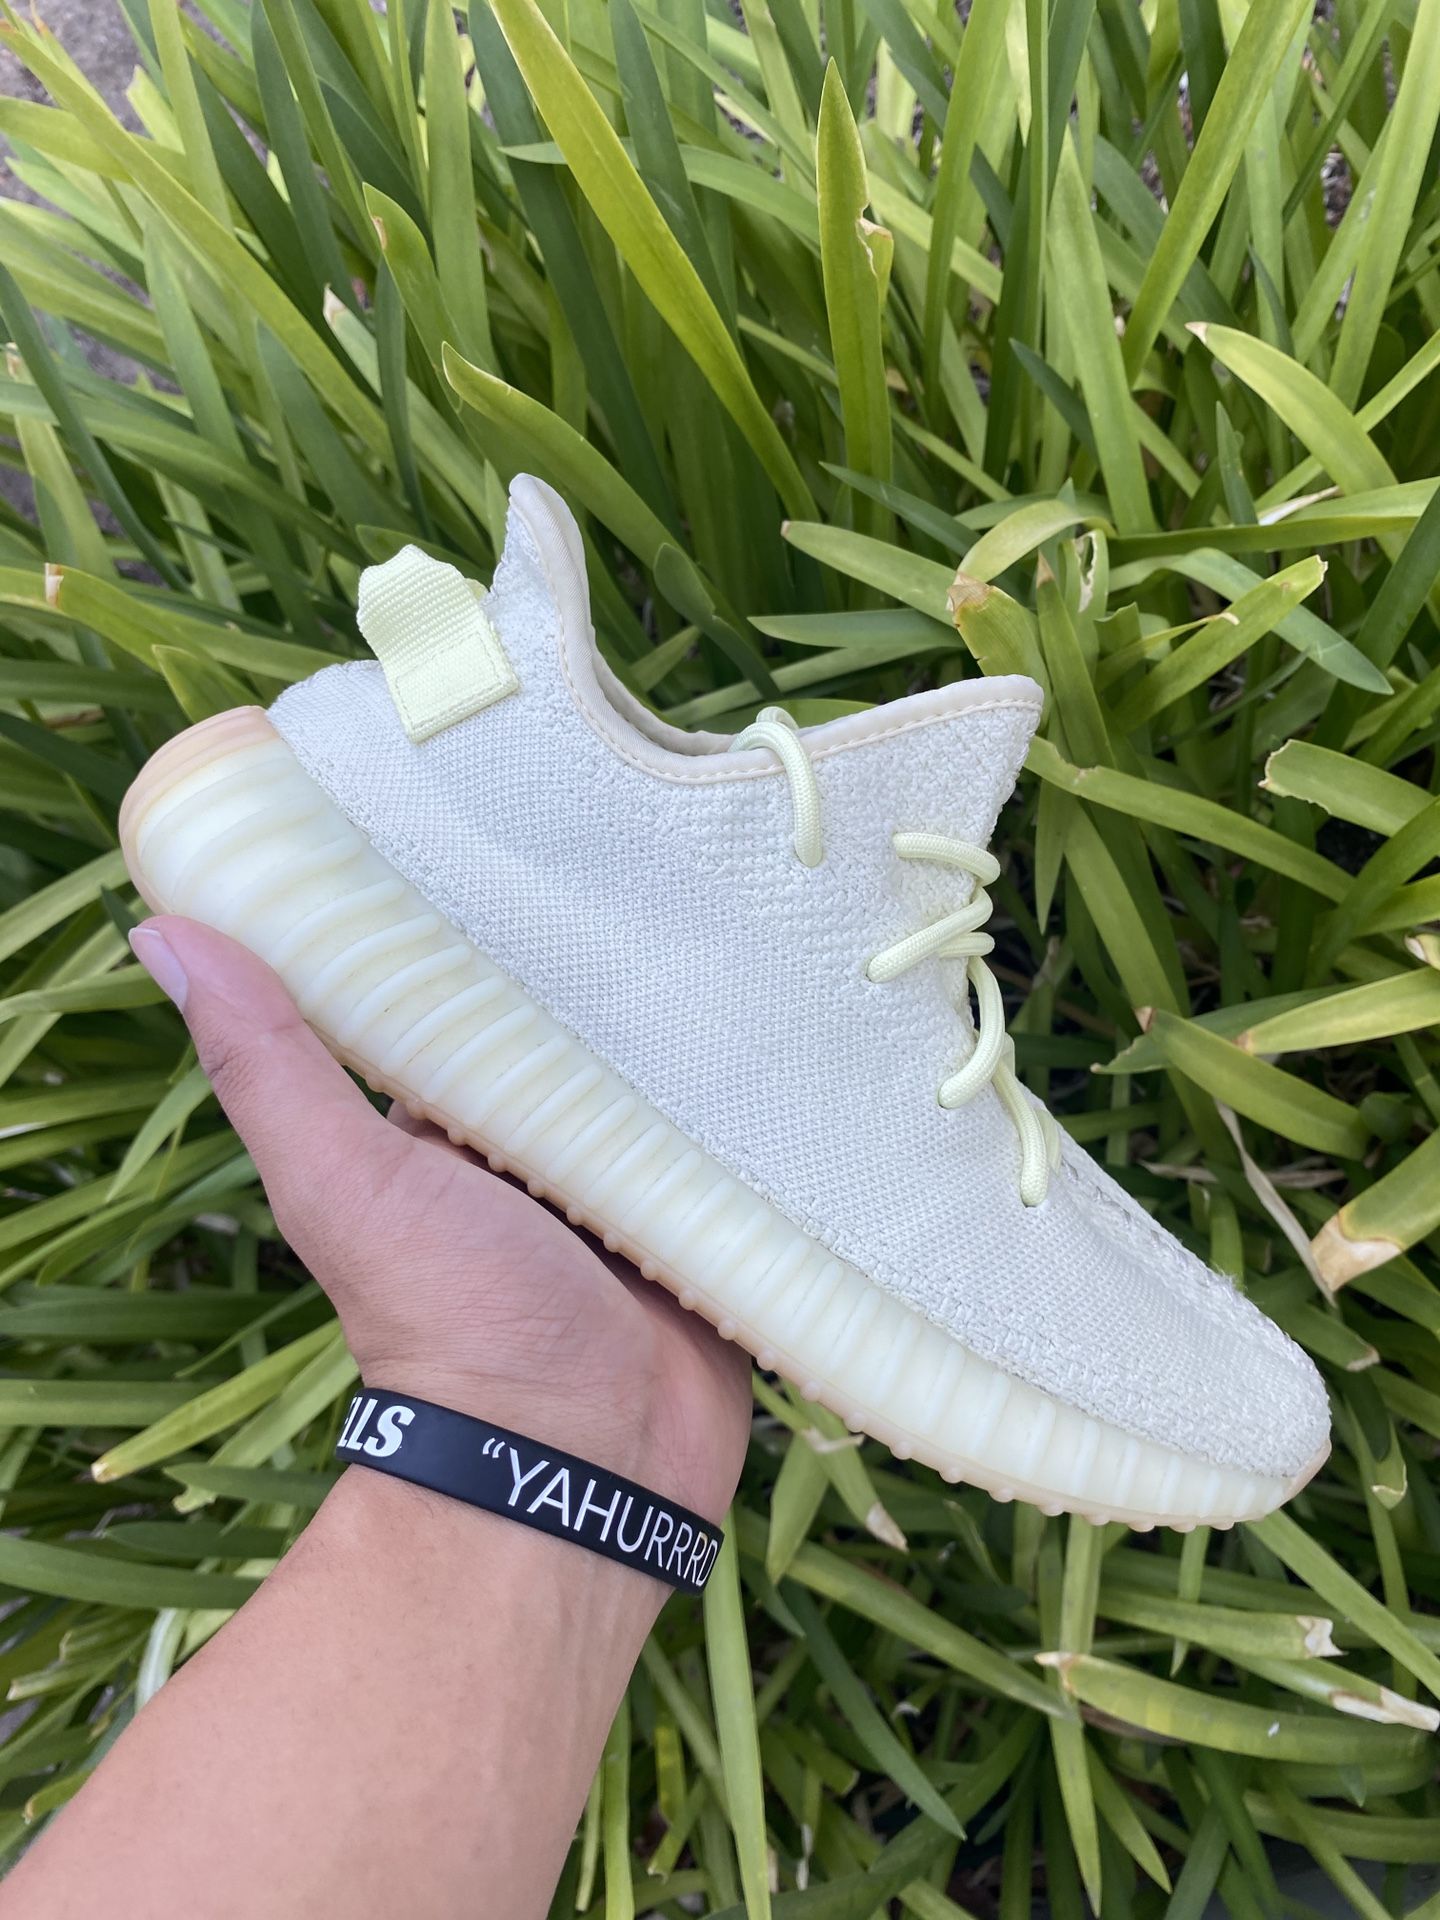 Yeezy butter size 8